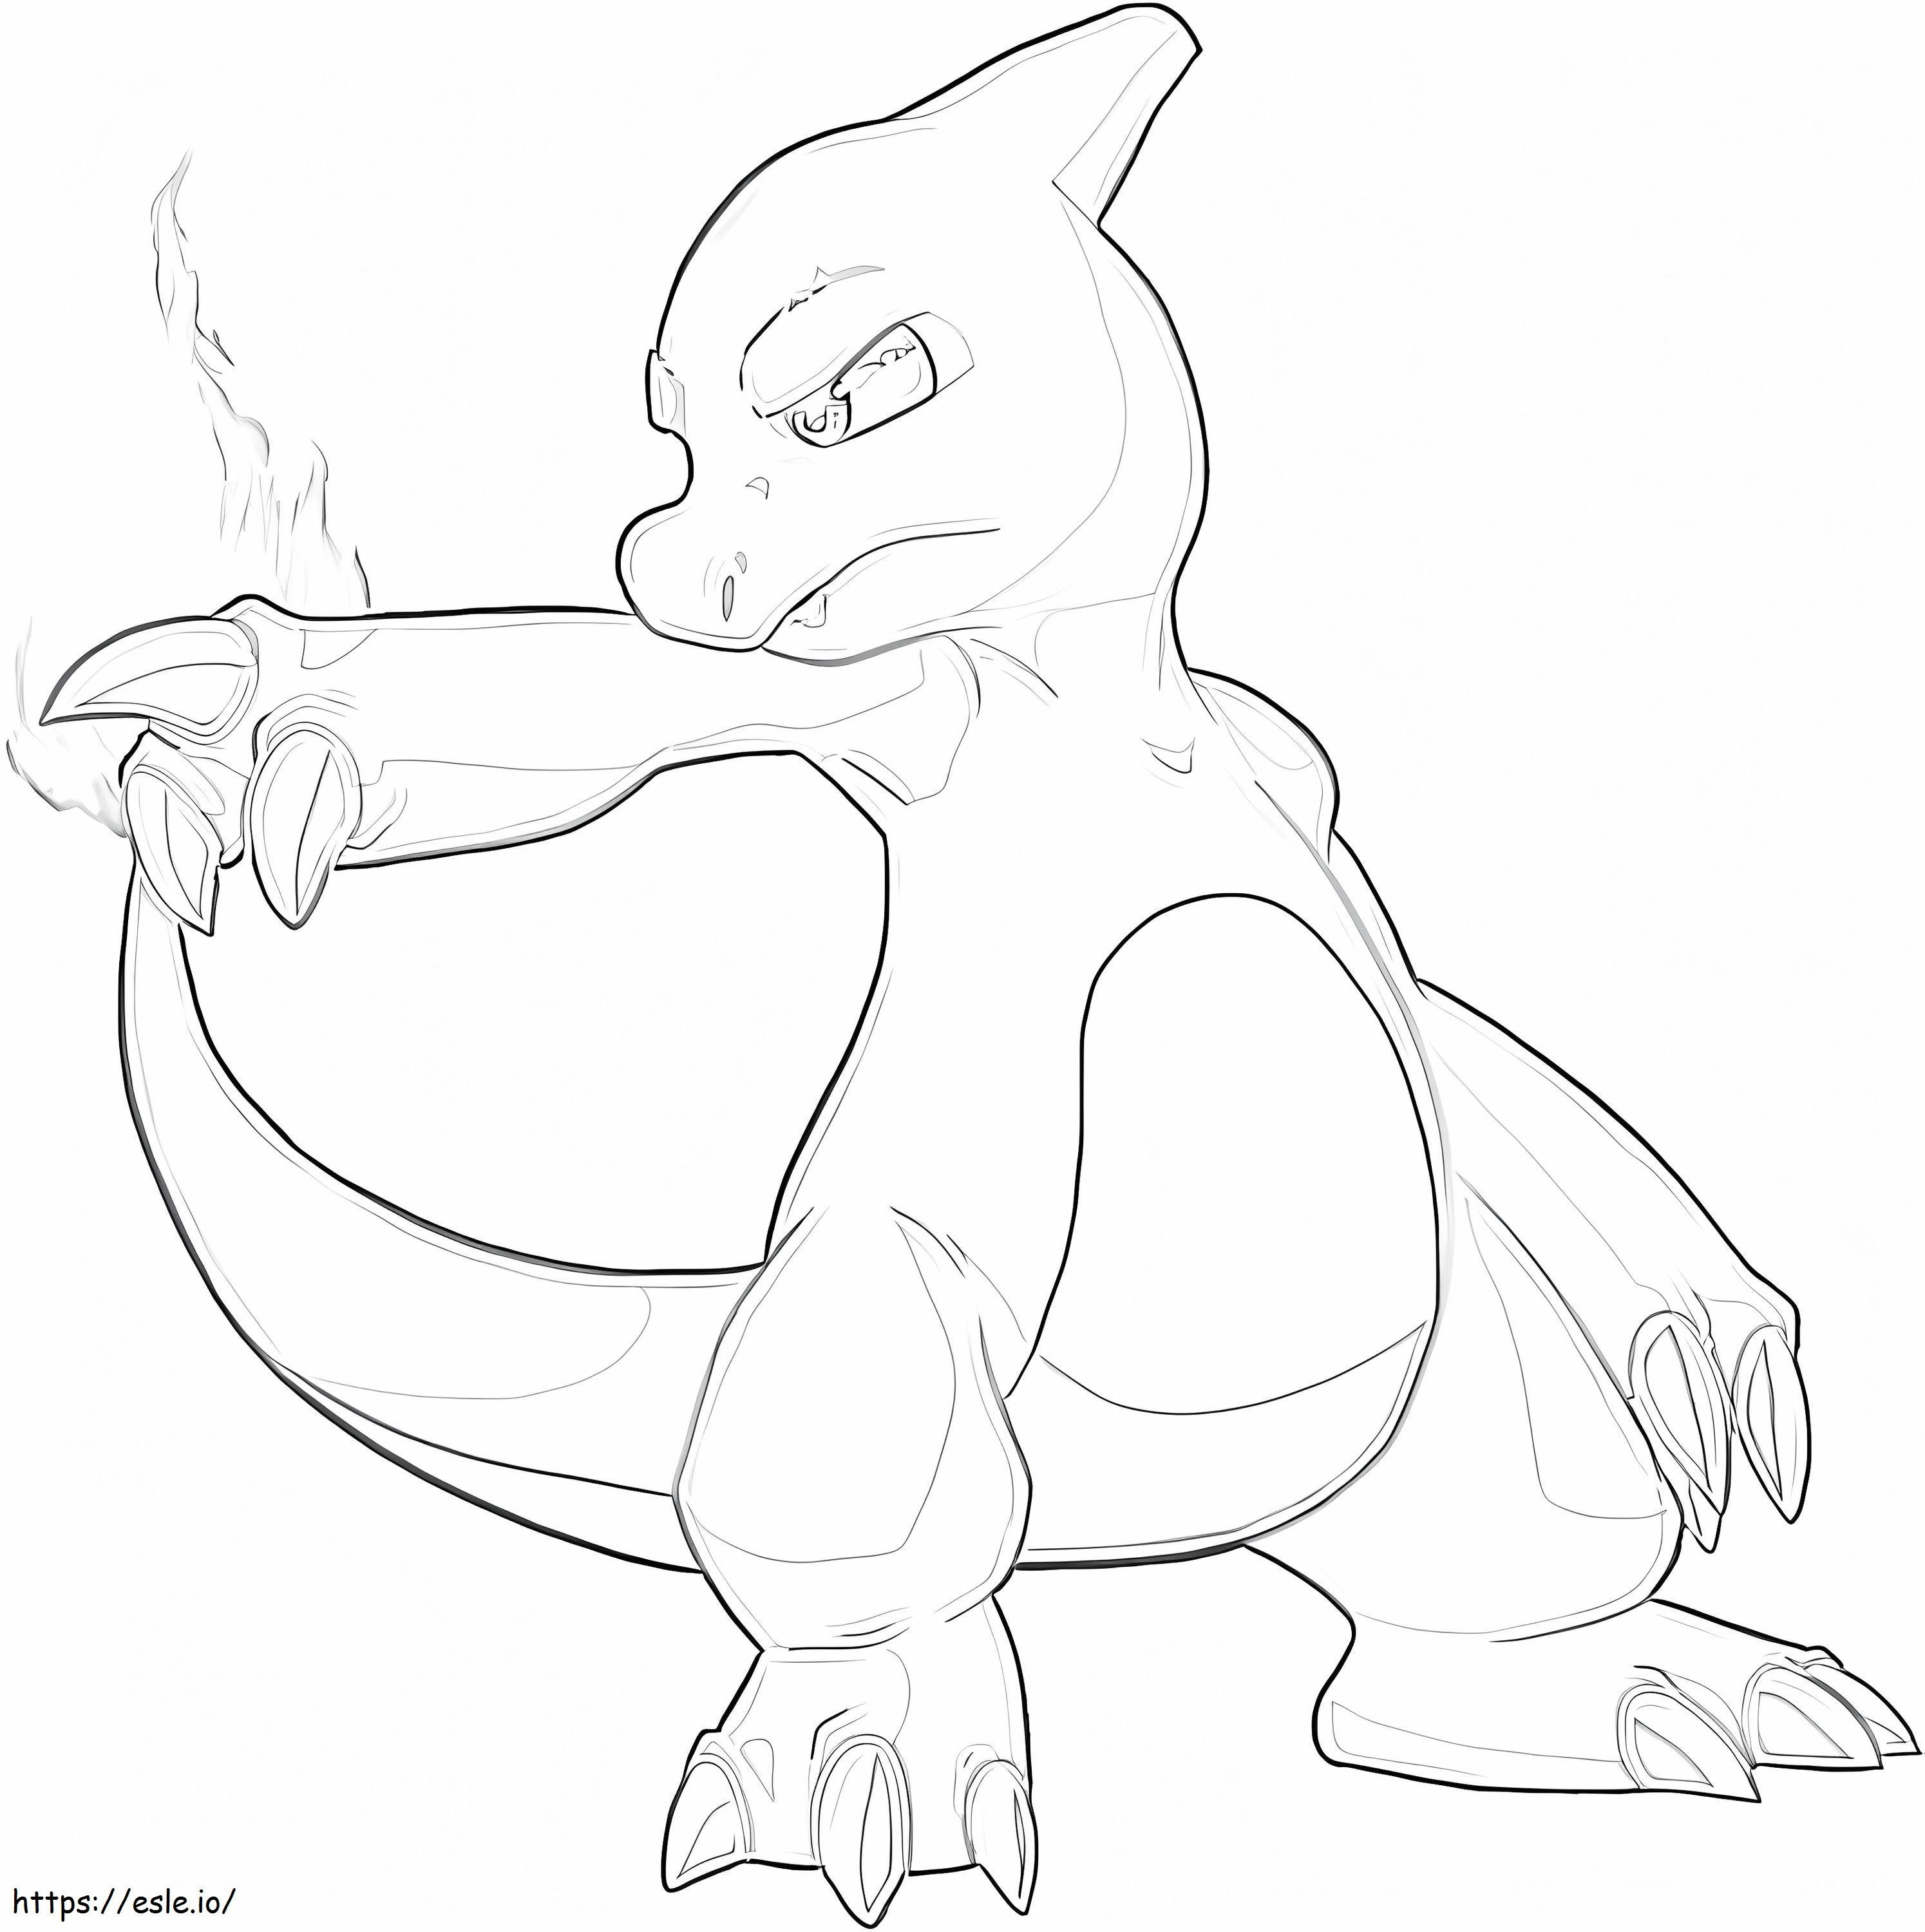 Cool Pokemon Charmeleon coloring page